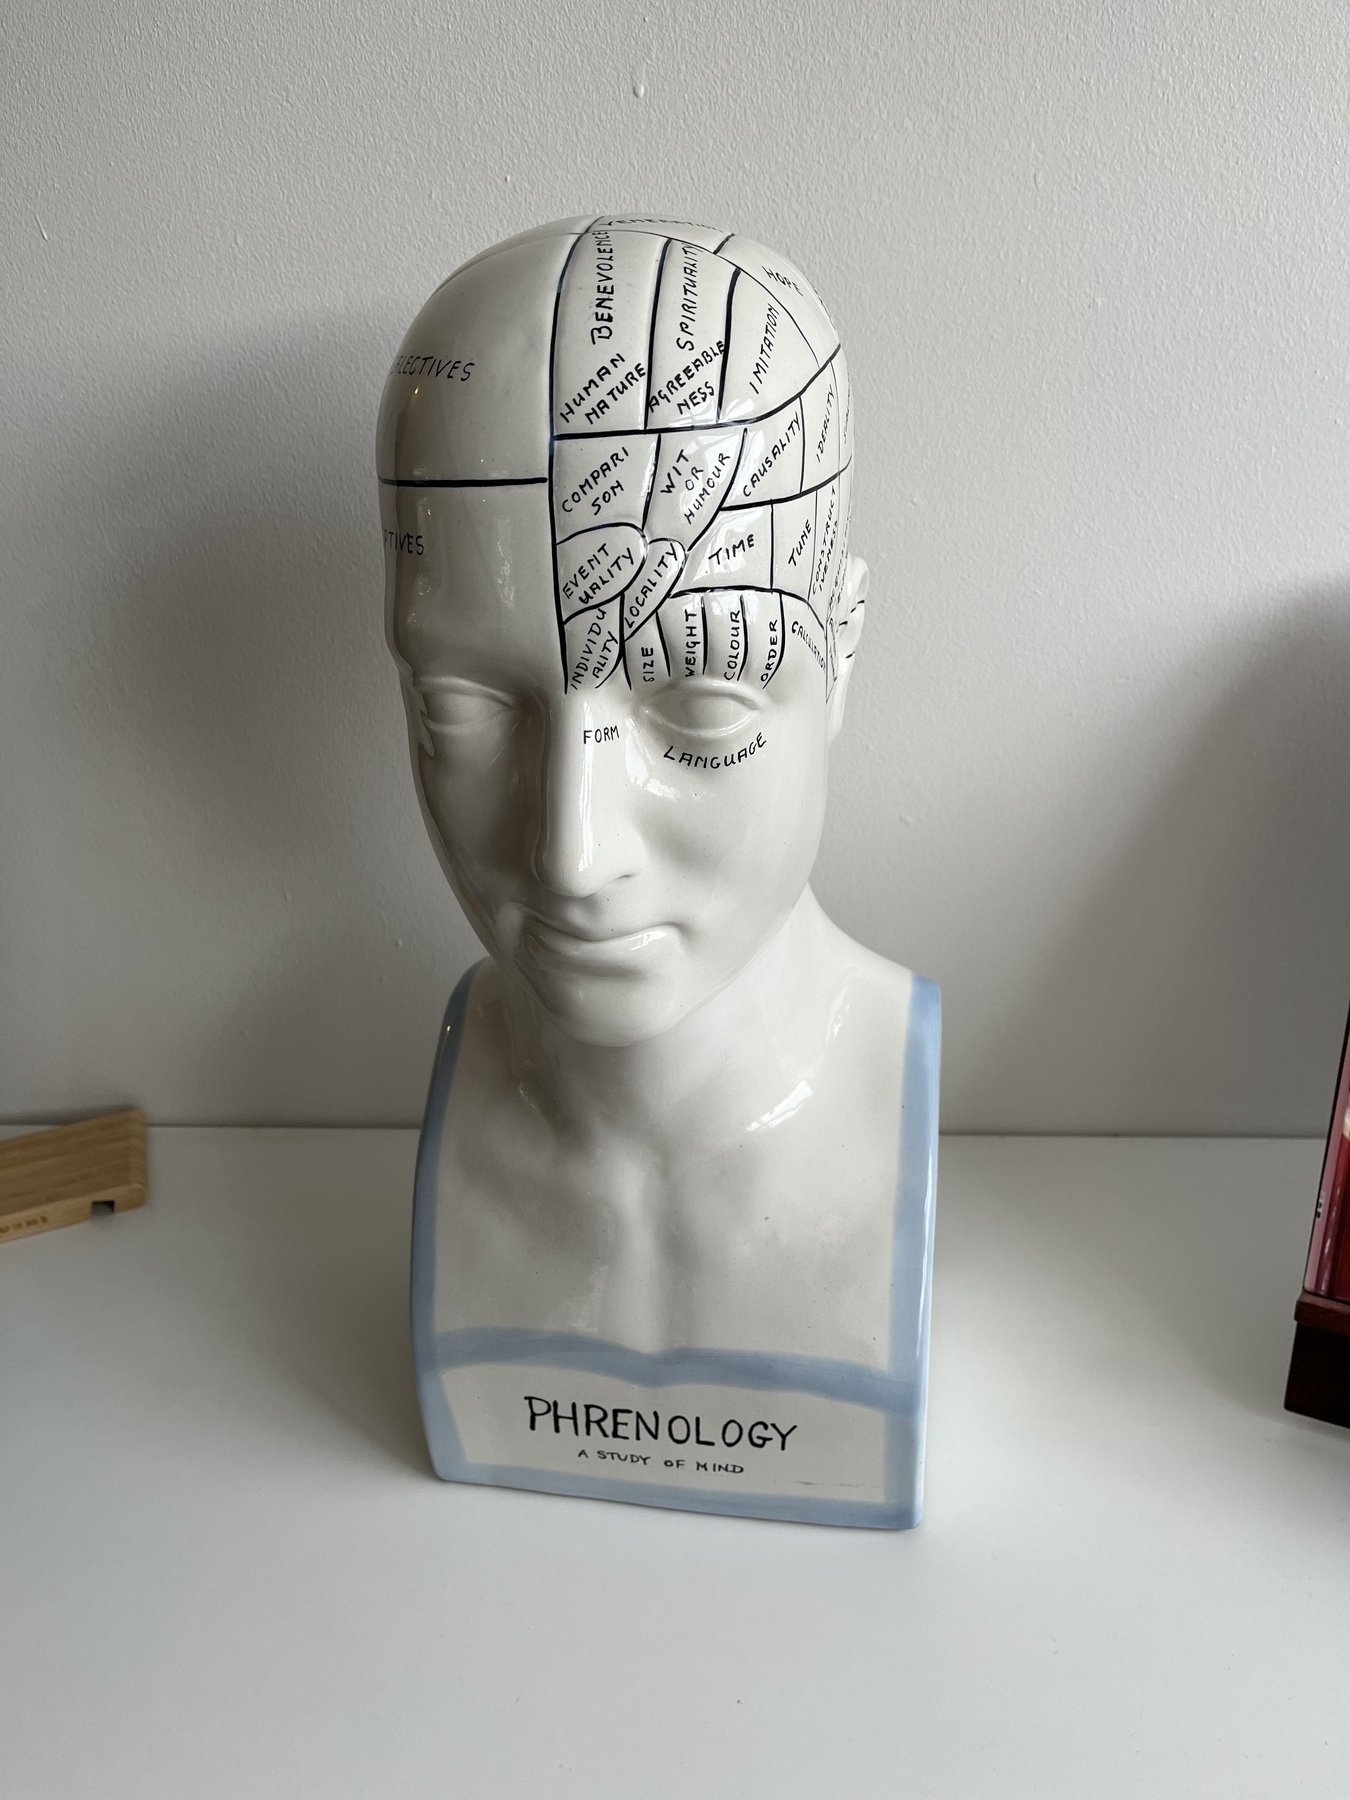 A phrenology bust that was used by quacks and pseudo scientists to explain human intelligence and behaviour. 